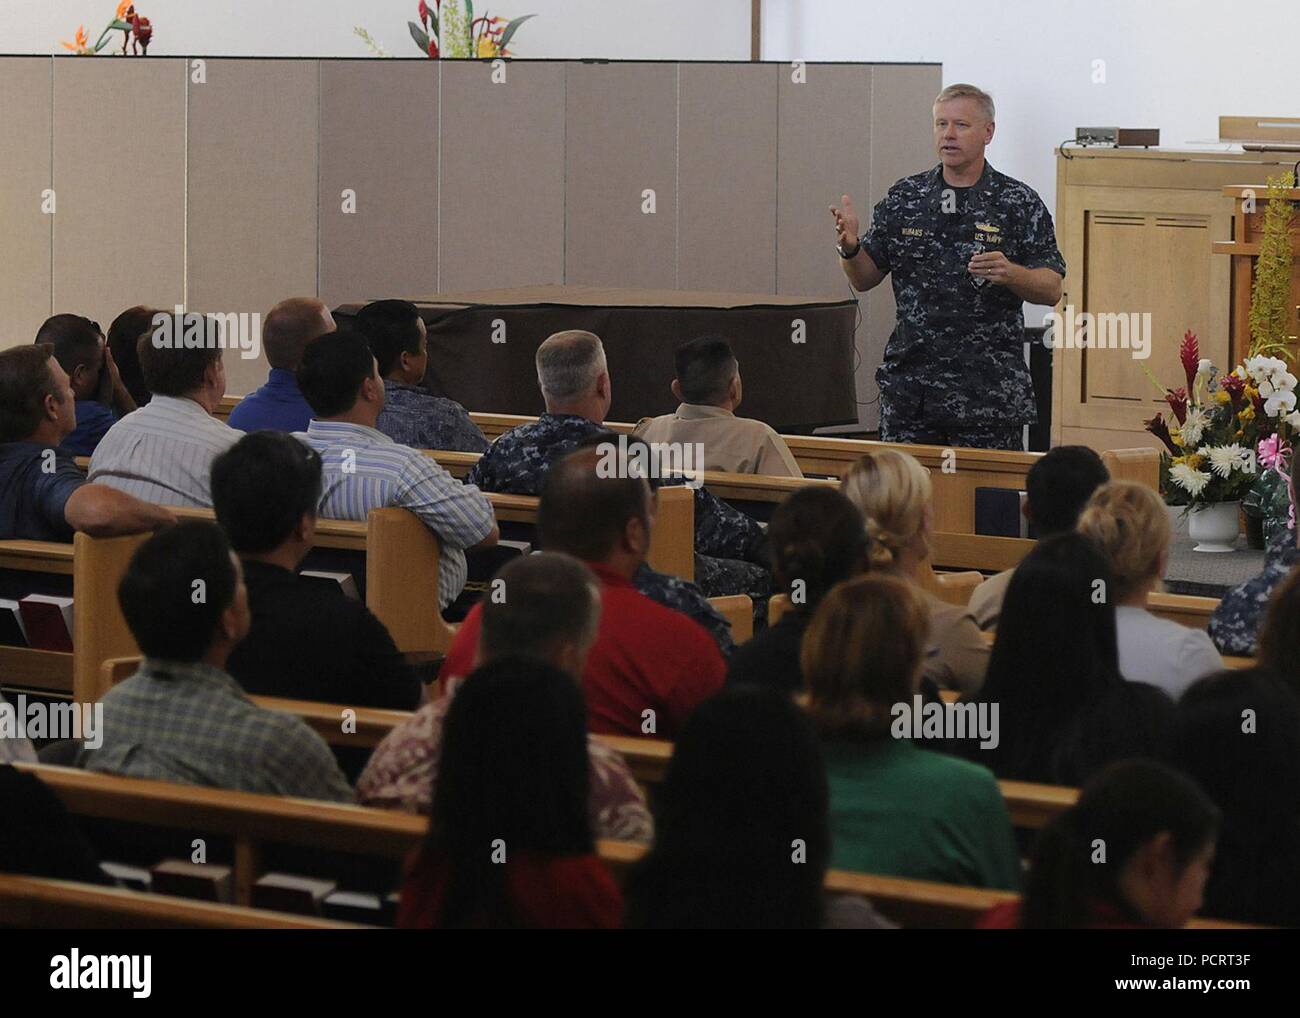 PEARL HARBOR (Aug. 15, 2013) Rear Adm. Rick Williams, commander of Navy Region Hawaii and Naval Surface Group Middle Pacific, delivers remarks on operational, family and personal readiness issues during an all-hands call at the Joint Base Pearl Harbor-Hickam Memorial Chapel. It was the first all-hands call for Williams since assuming command in July. ) Stock Photo